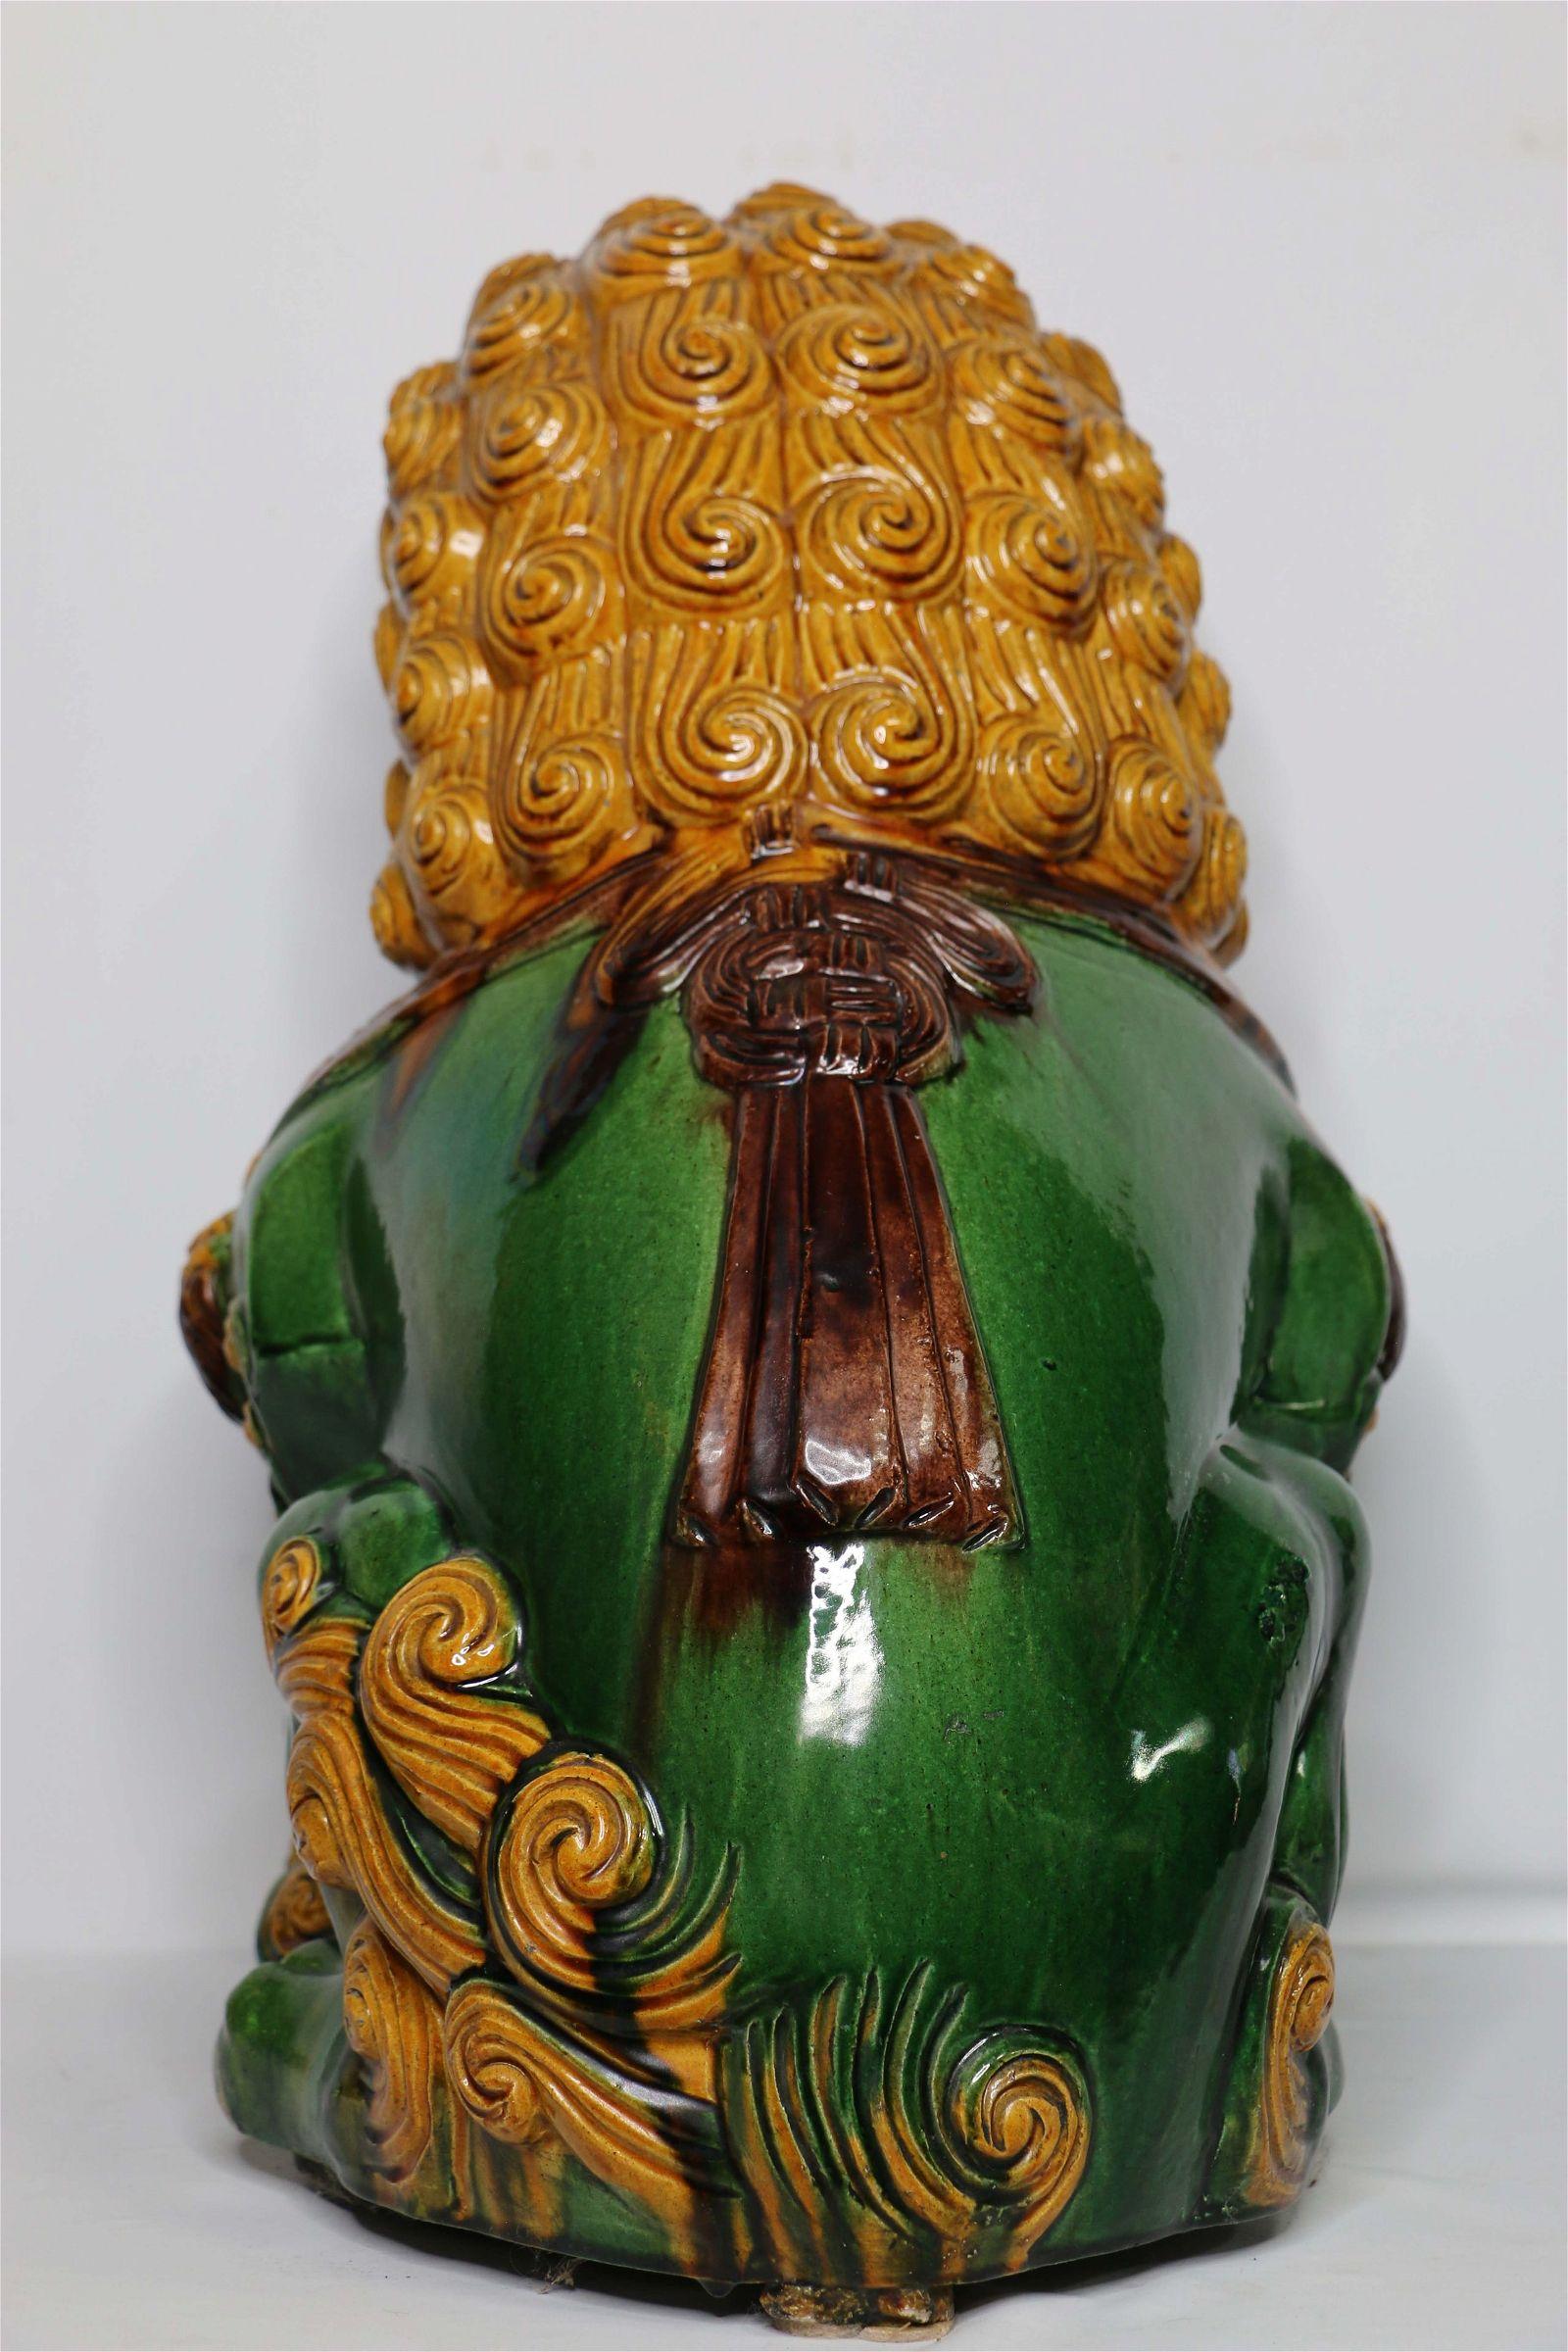 Antique Large Chinese Shanxi Glazed Ceramic Foo Dog In Good Condition For Sale In Sheridan, CO